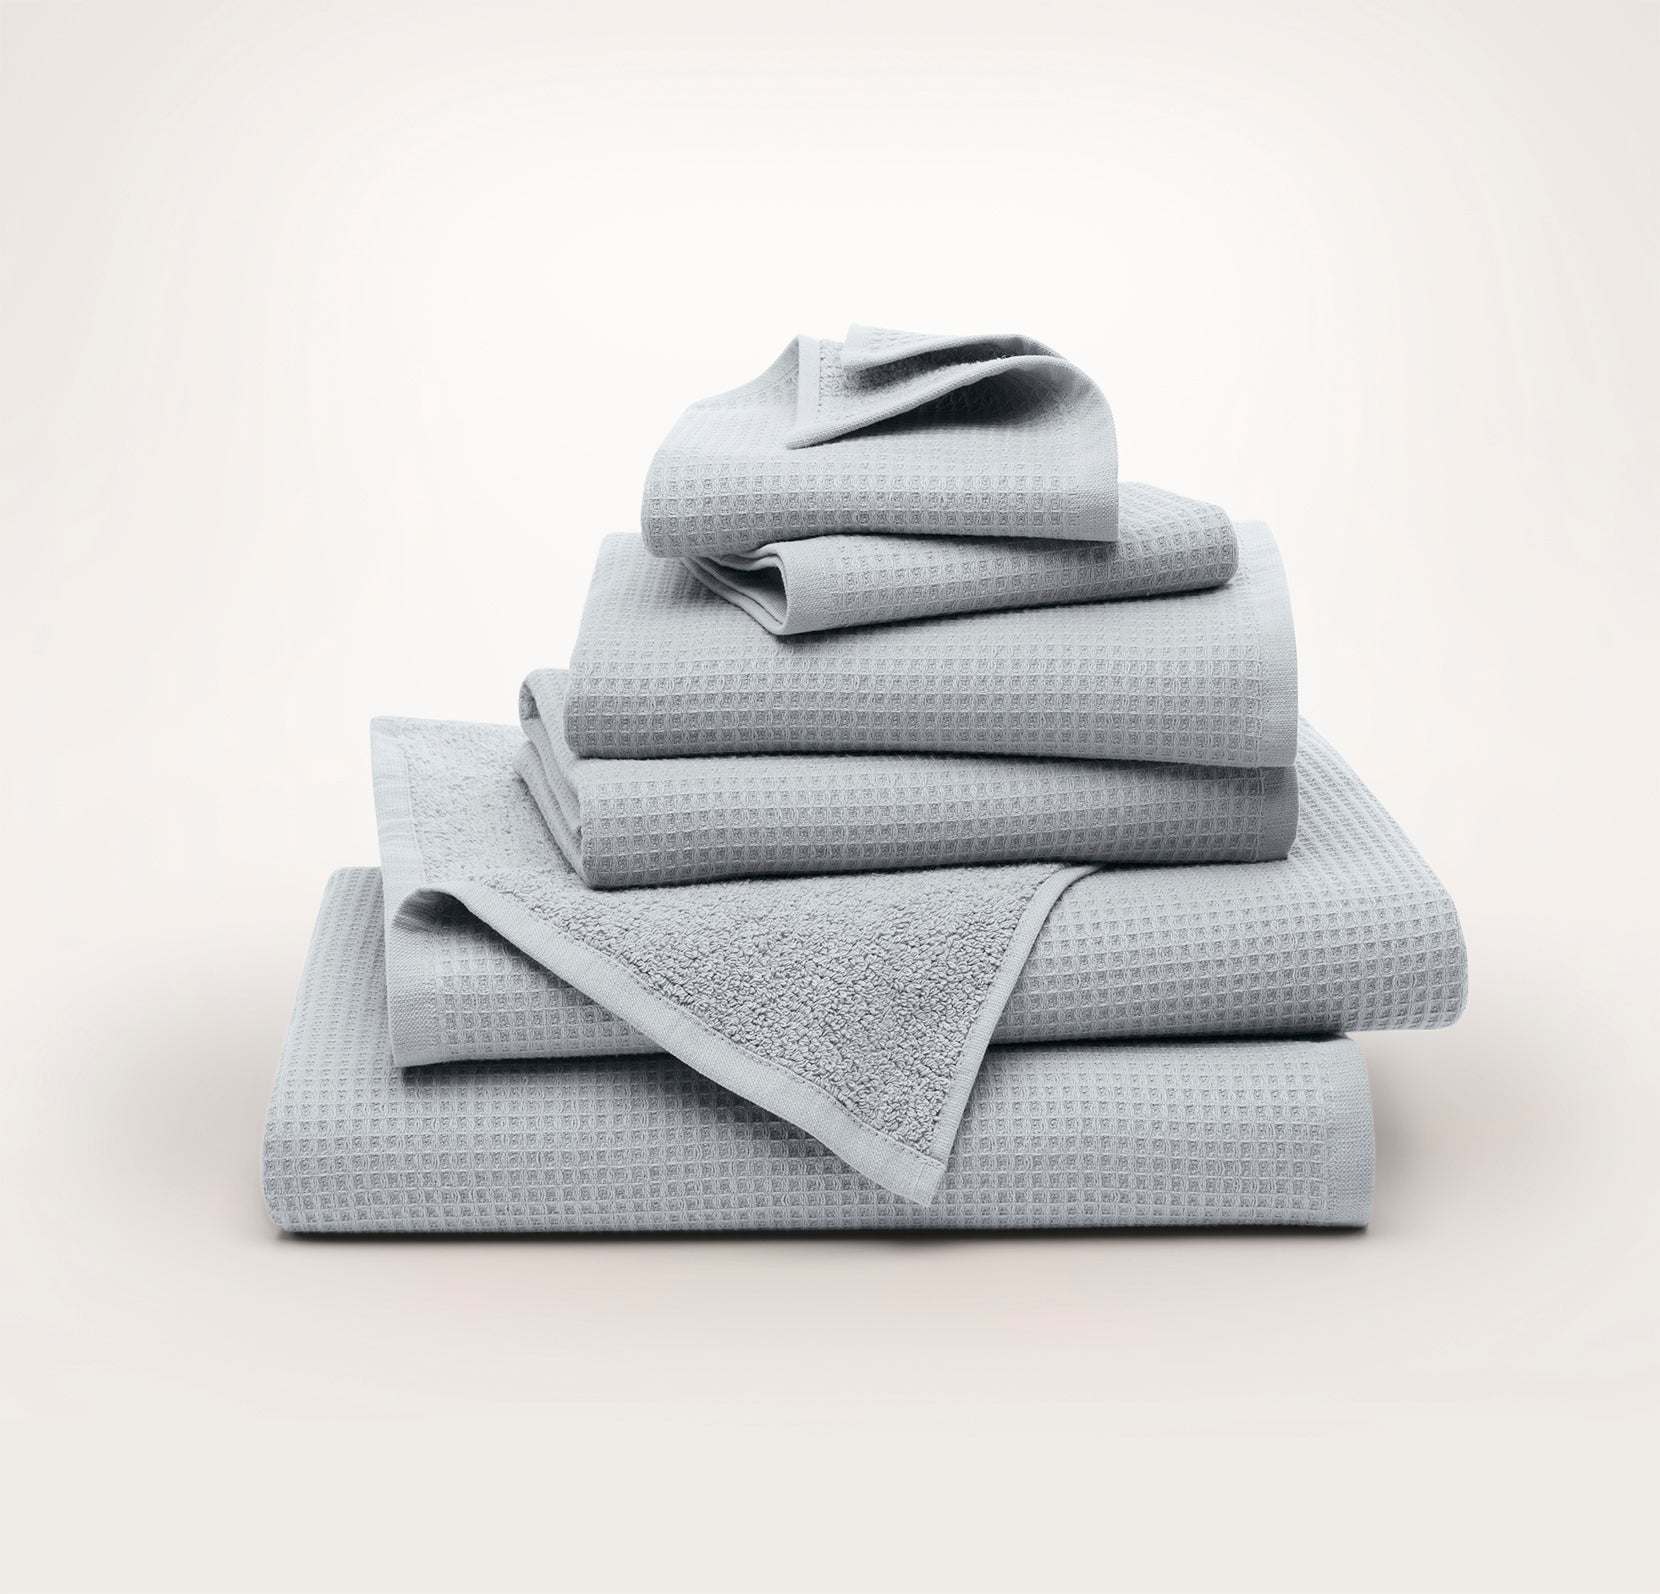 Boll & Branch Plush Set Of 2 Organic Cotton Hand Towels In Pale Pewter